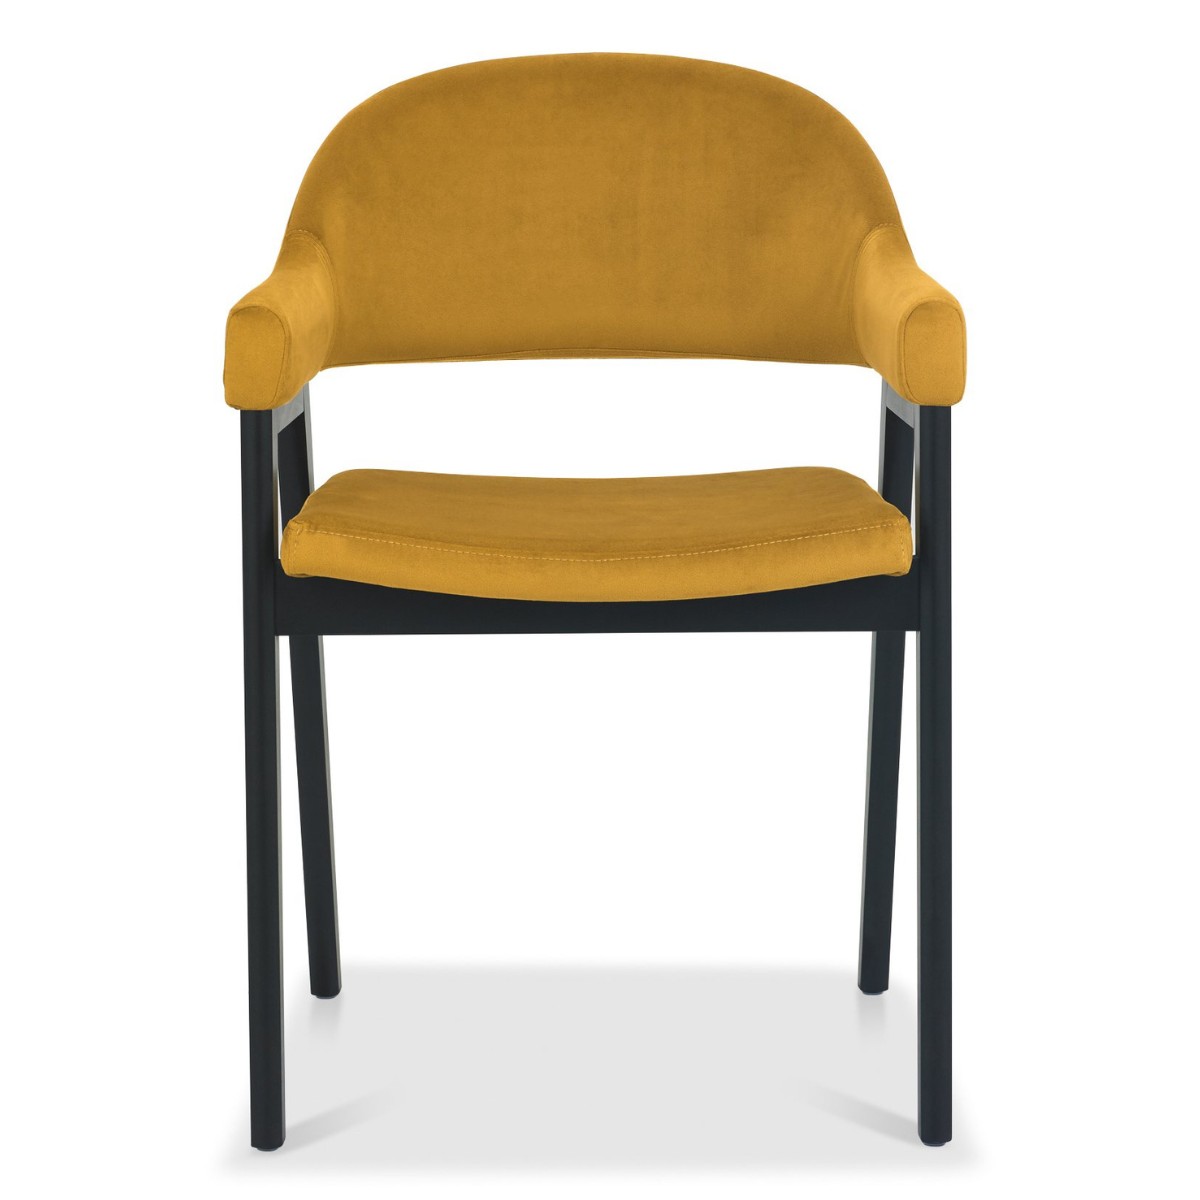 Chambery Weathered Oak Curved Back Dining Chair Yellow - 2